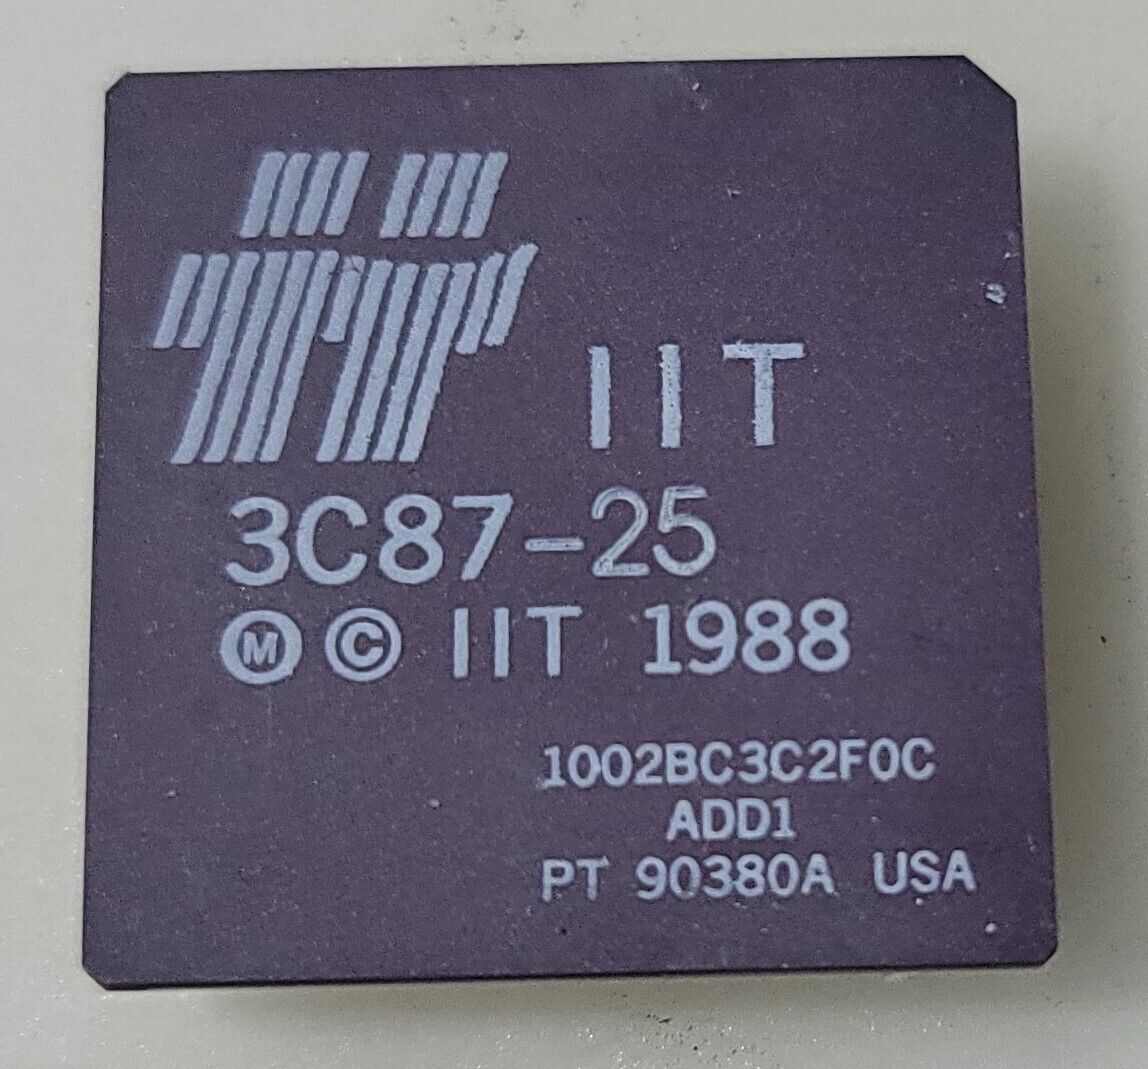 Vintage Rare IIT 3C87-25 Ceramic Processor 1988 Collection/Gold Recovery